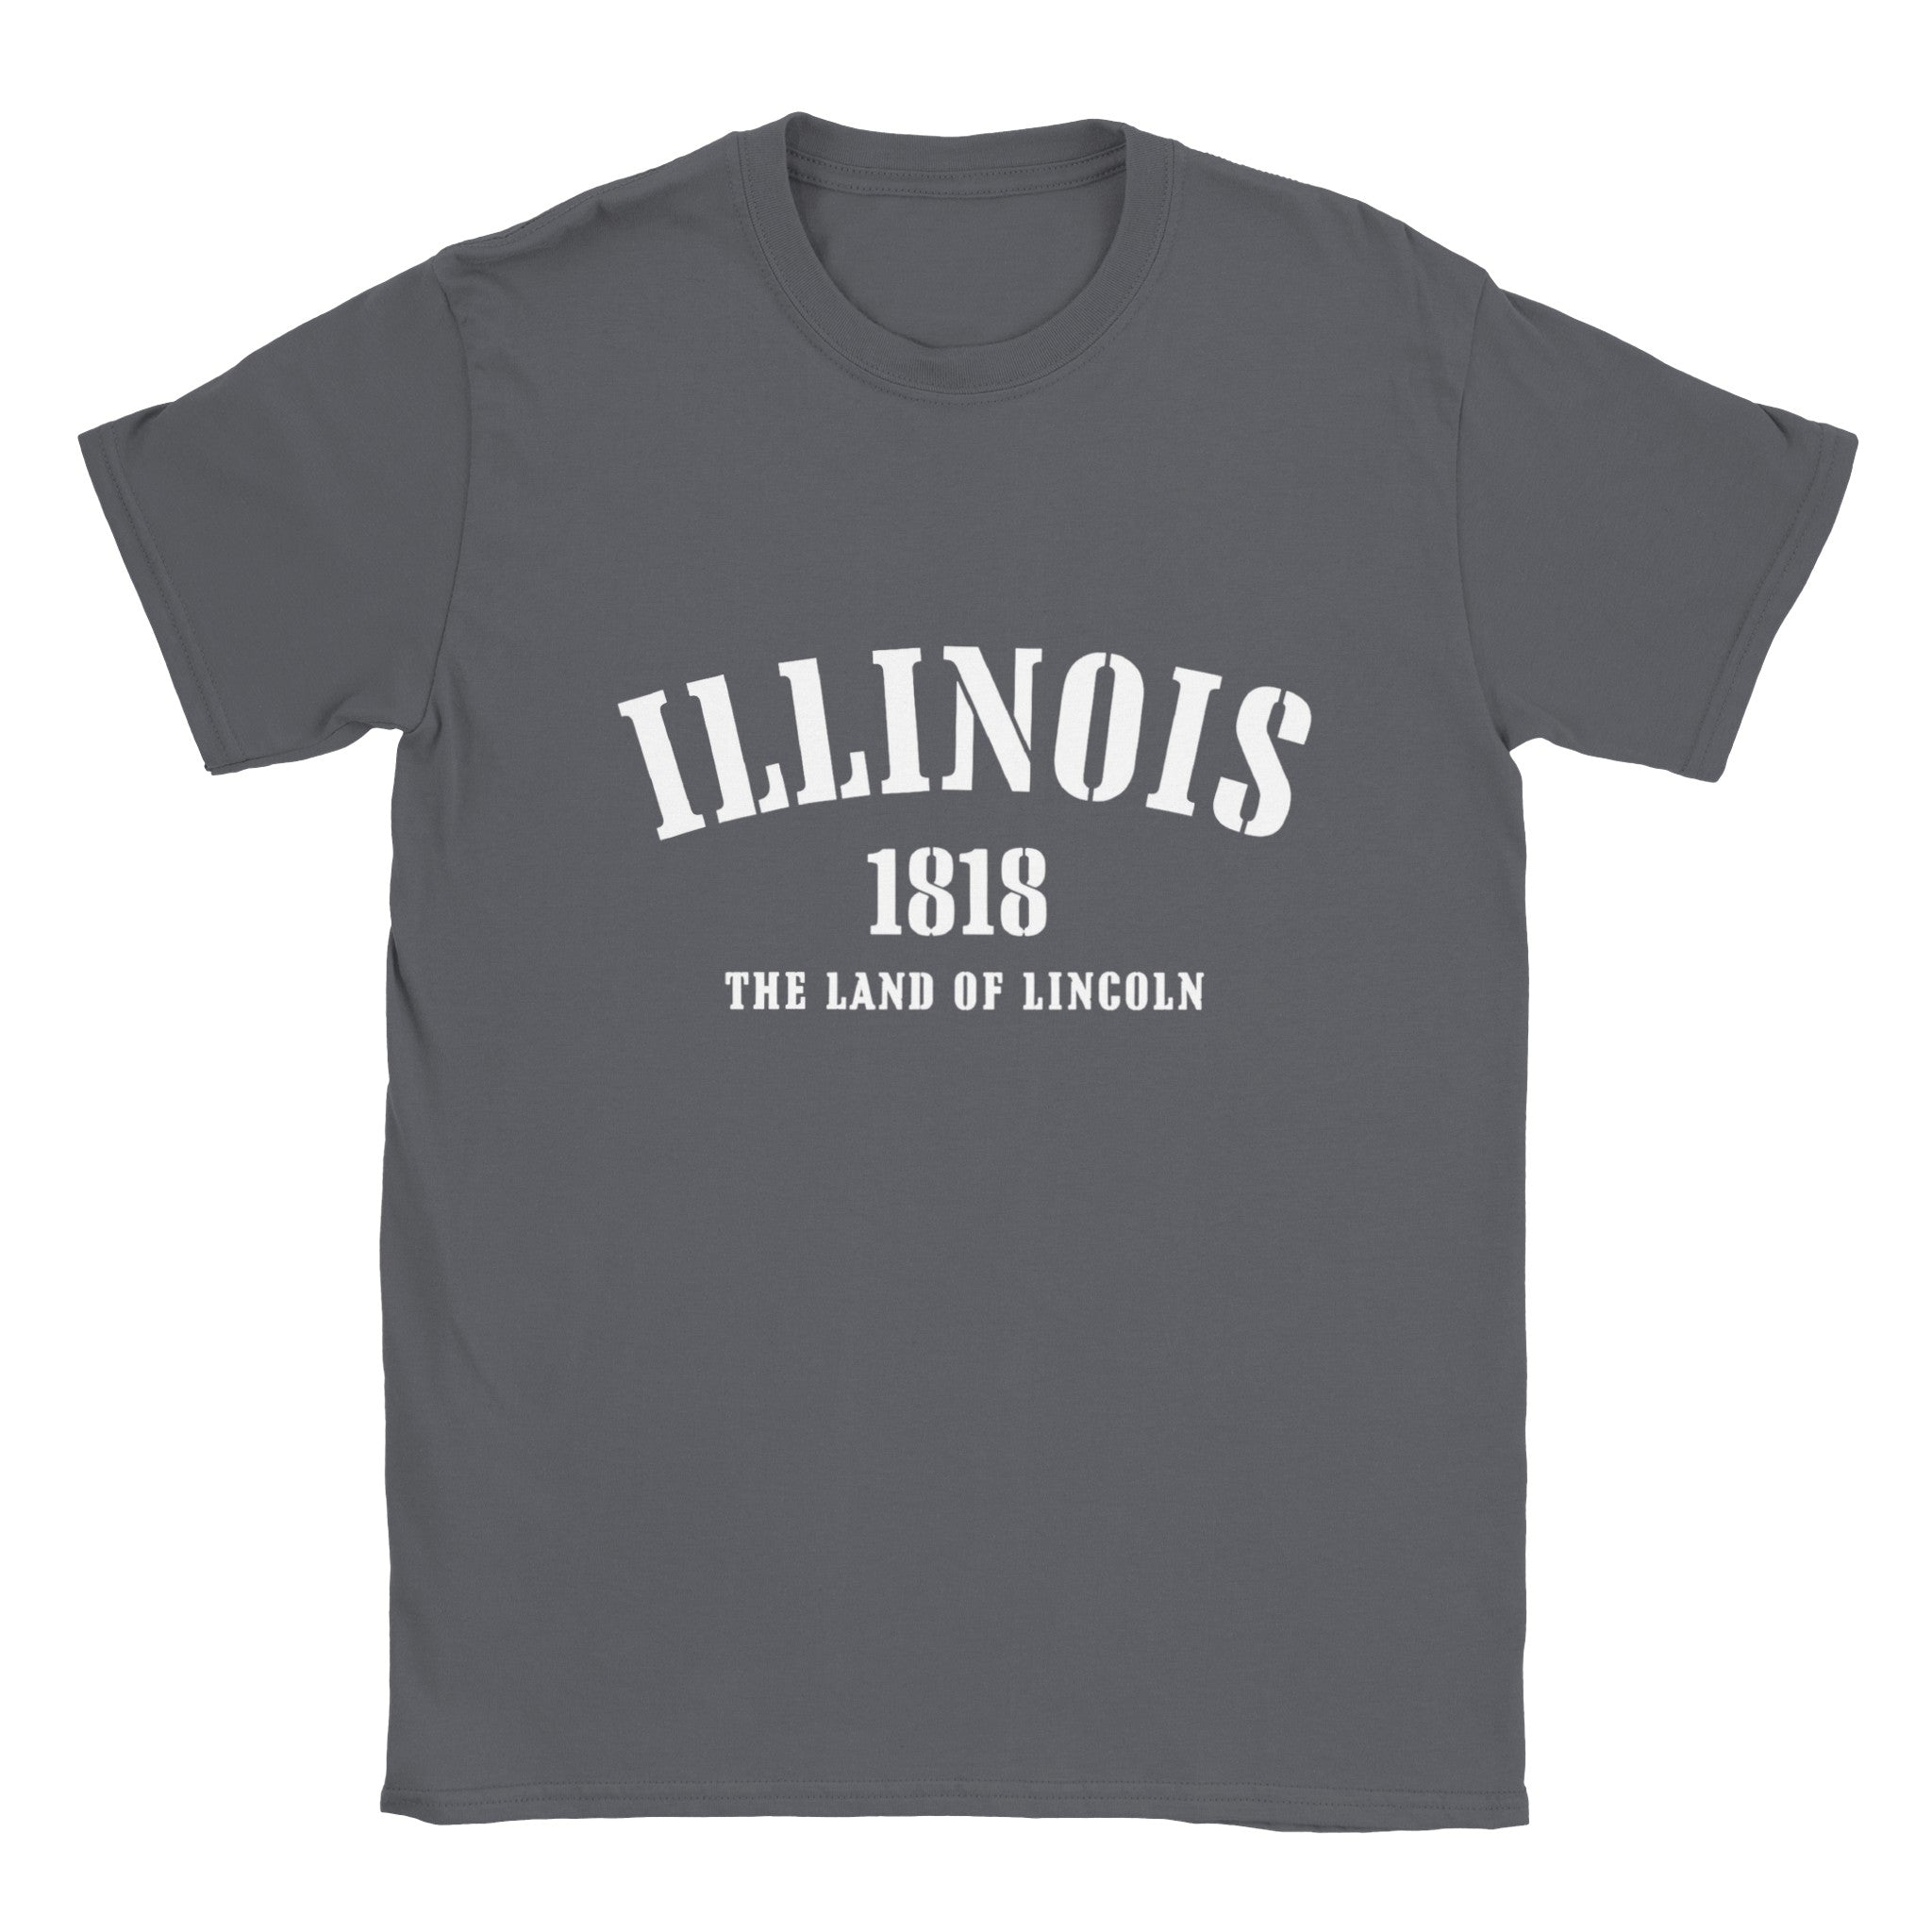 Illinois- Classic Unisex Crewneck States T-shirt - Creations by Chris and Carlos